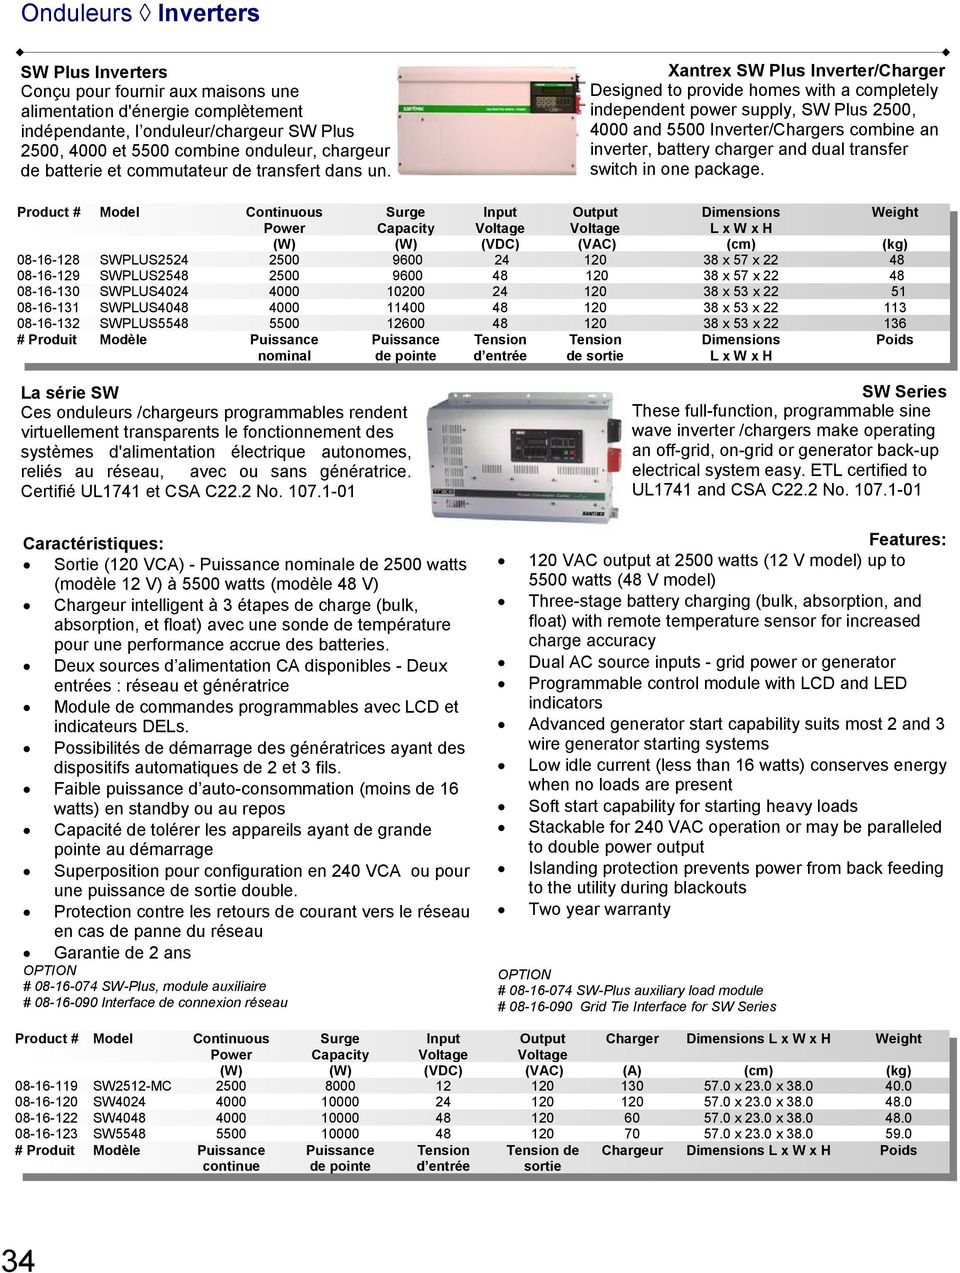 Xantrex SW Plus Inverter/Charger Designed to provide homes with a completely independent power supply, SW Plus 2500, 4000 and 5500 Inverter/Chargers combine an inverter, battery charger and dual